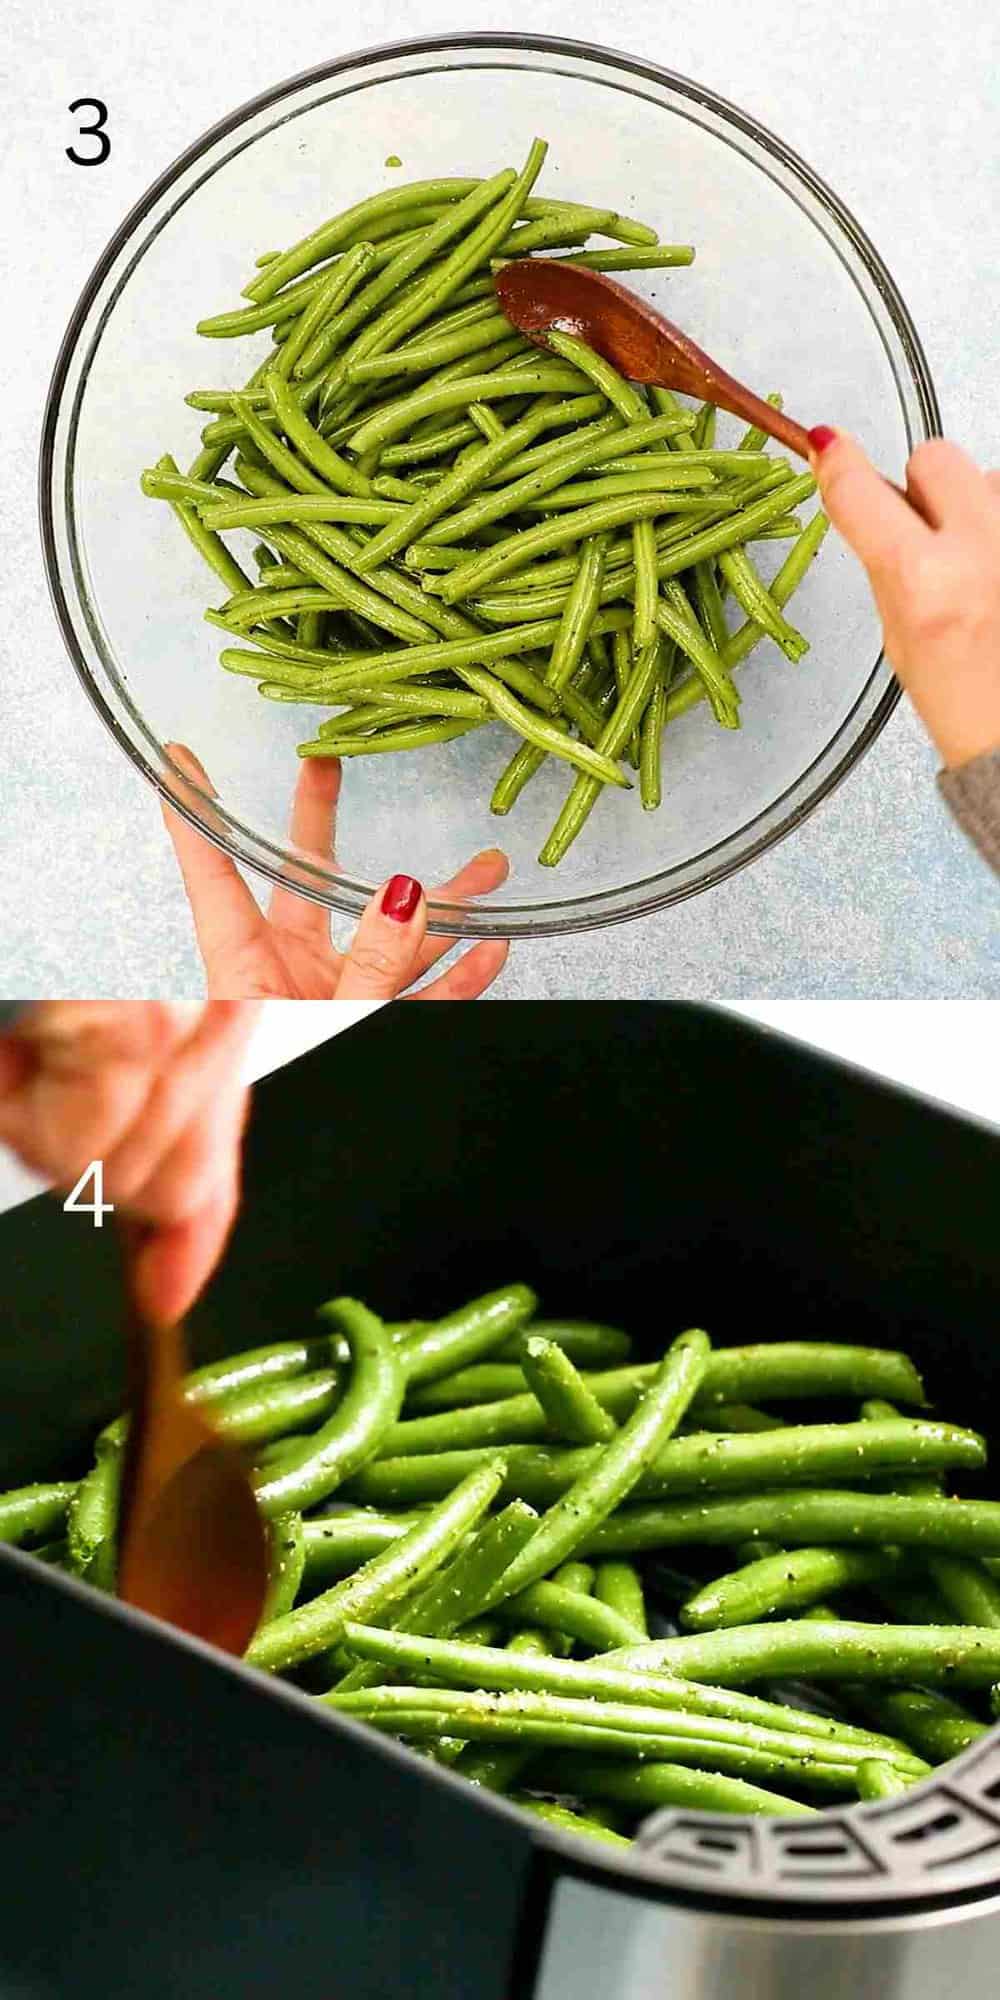 a hand tossing and placing green beans in an air fryer basket.